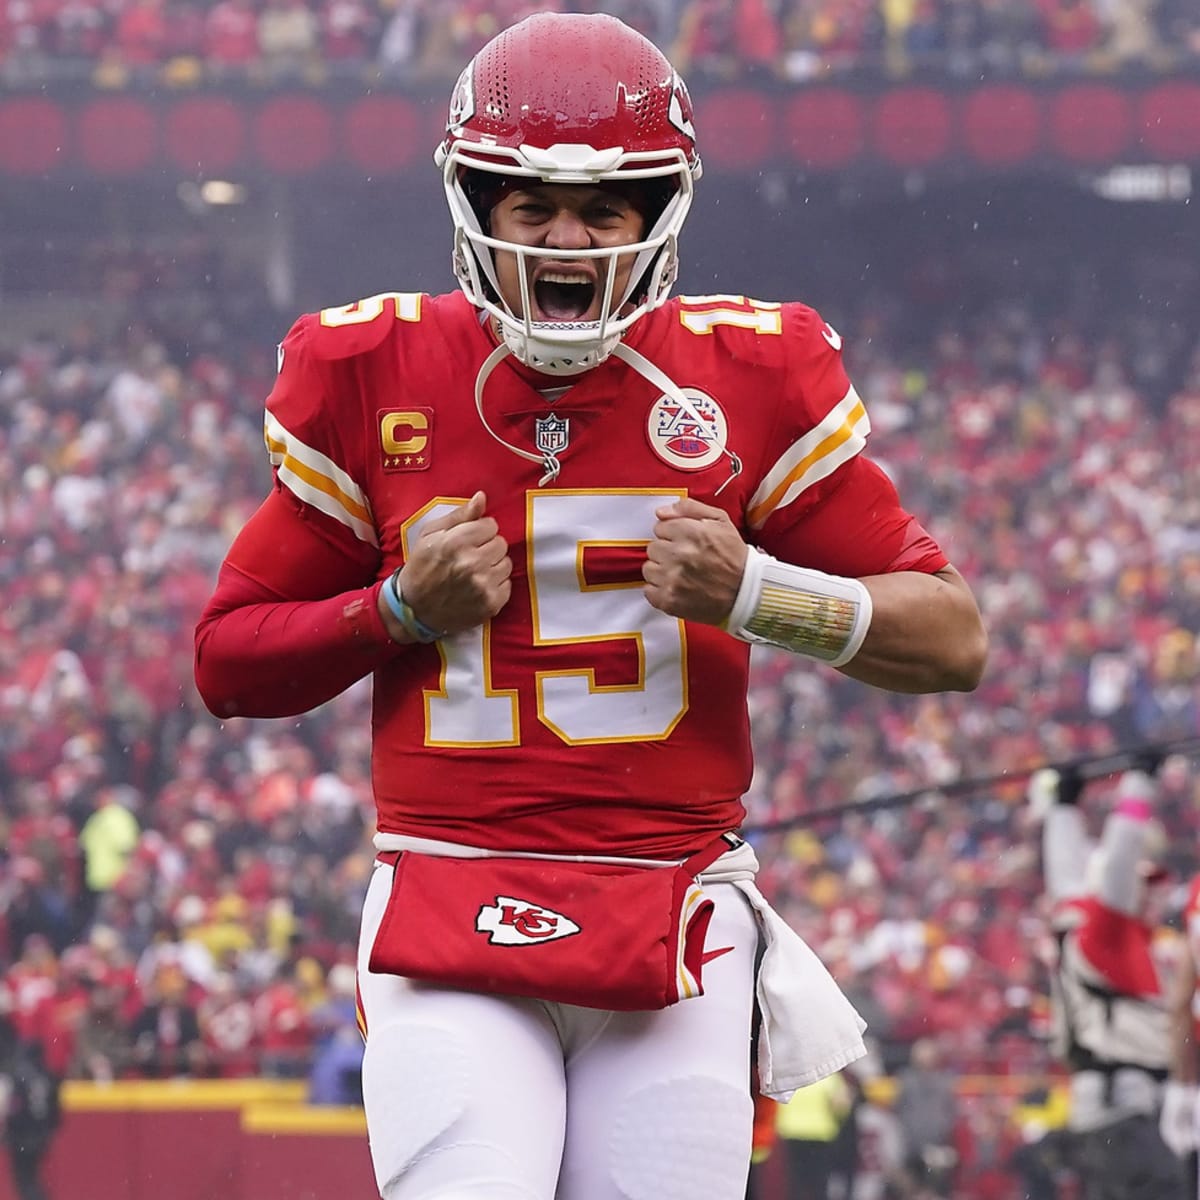 Chiefs Game Today: Chiefs vs Vikings injury report, schedule, live Stream,  TV channel and betting preview for Preseason Week 3 NFL game